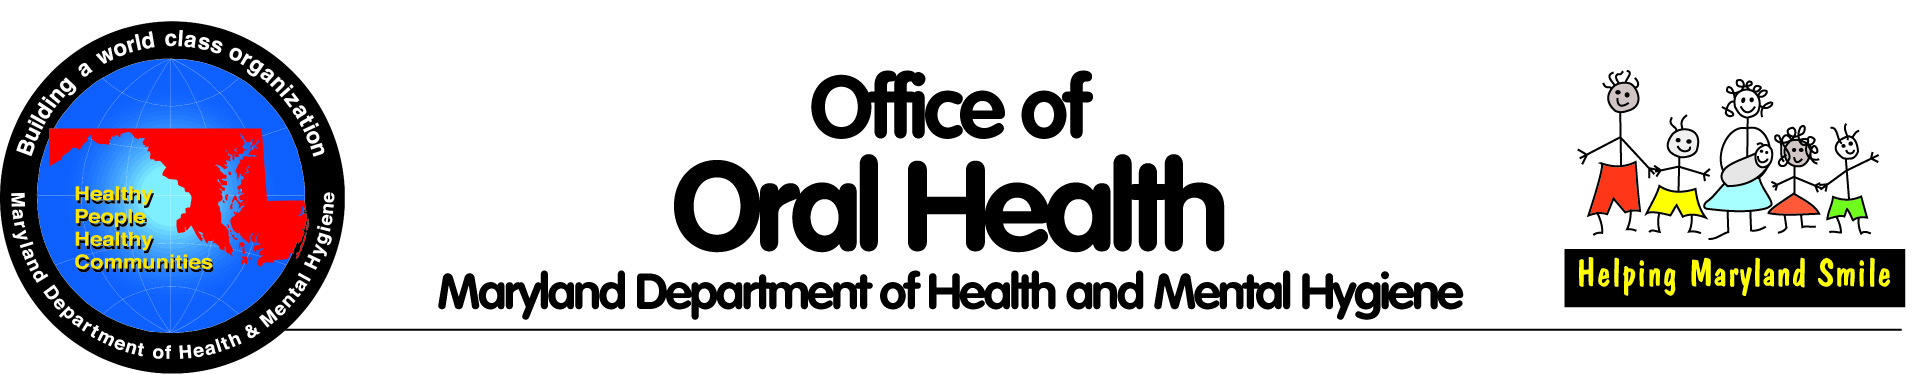 office of oral health logo